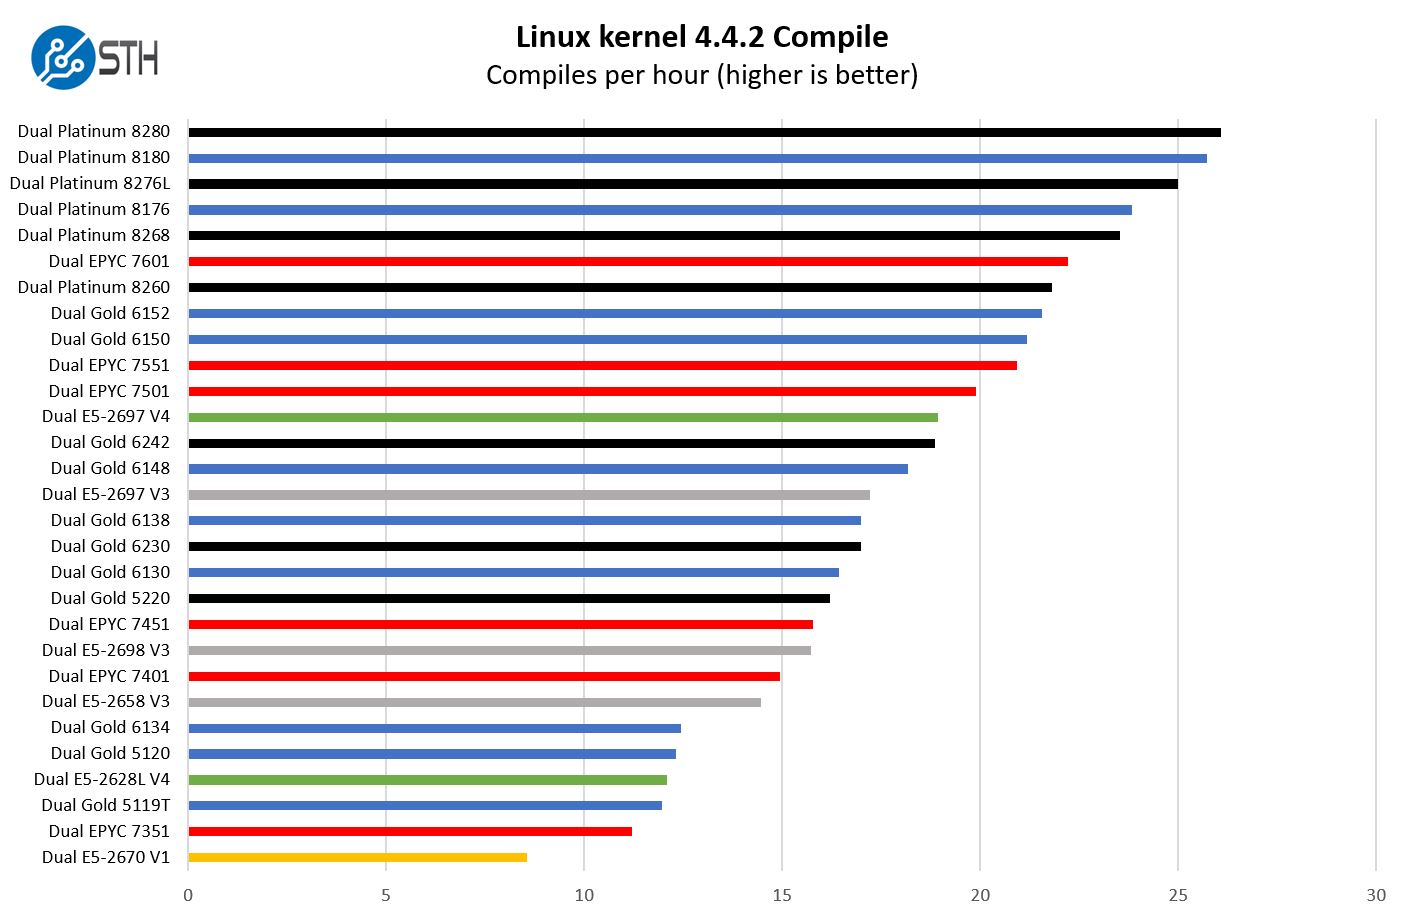 Intel Xeon Scalable 2P Linux Kernel Compile Benchmark Comparison